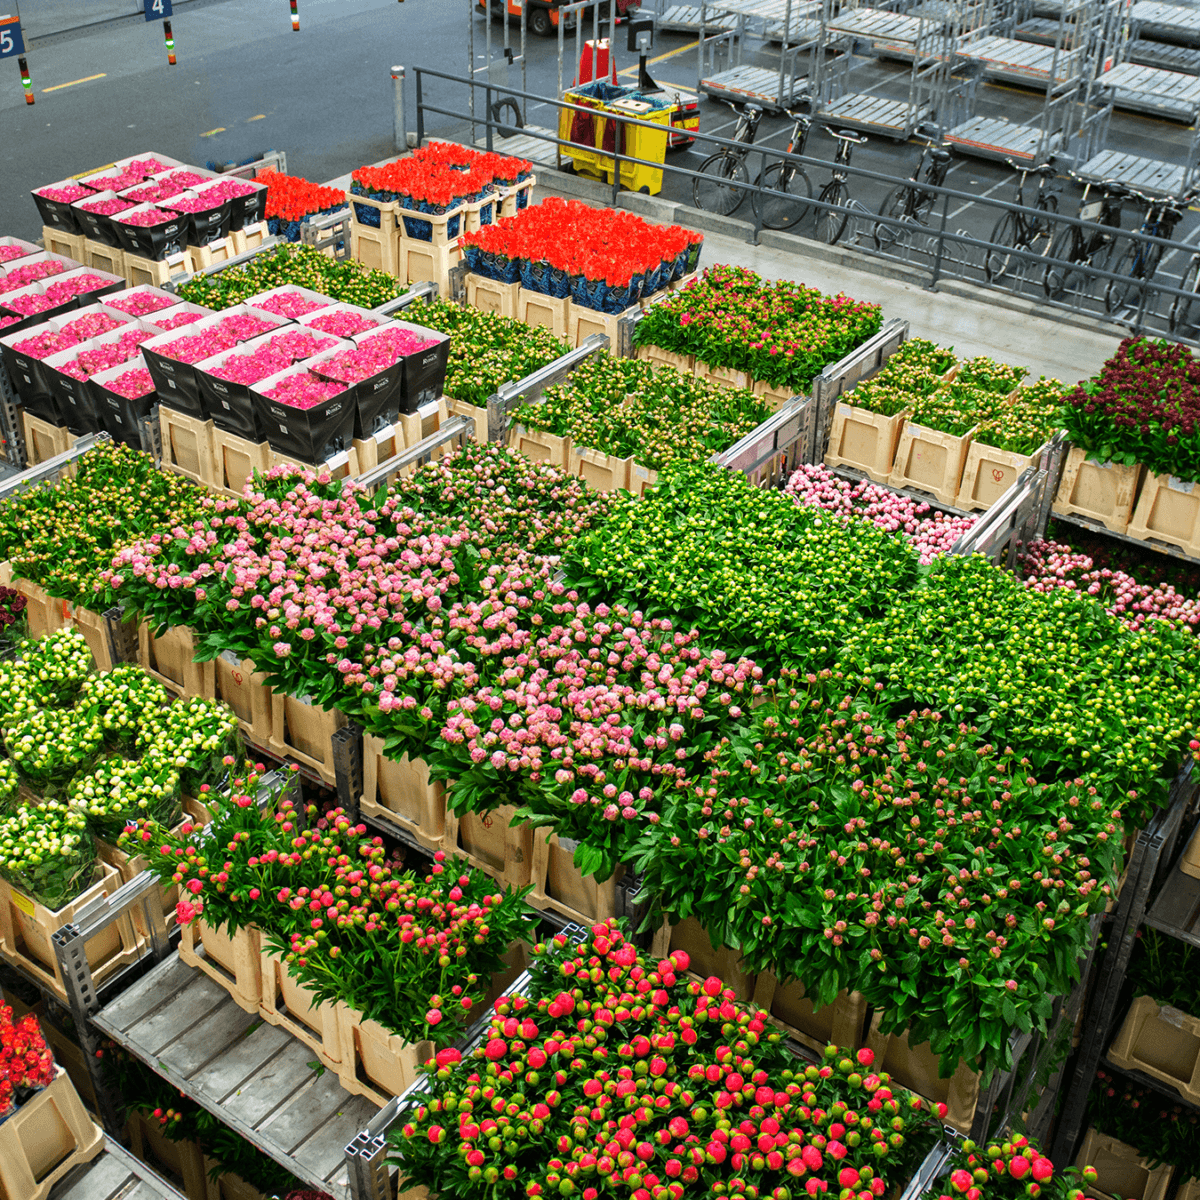 Boxes of colourful flowers in a Dutch warehouse